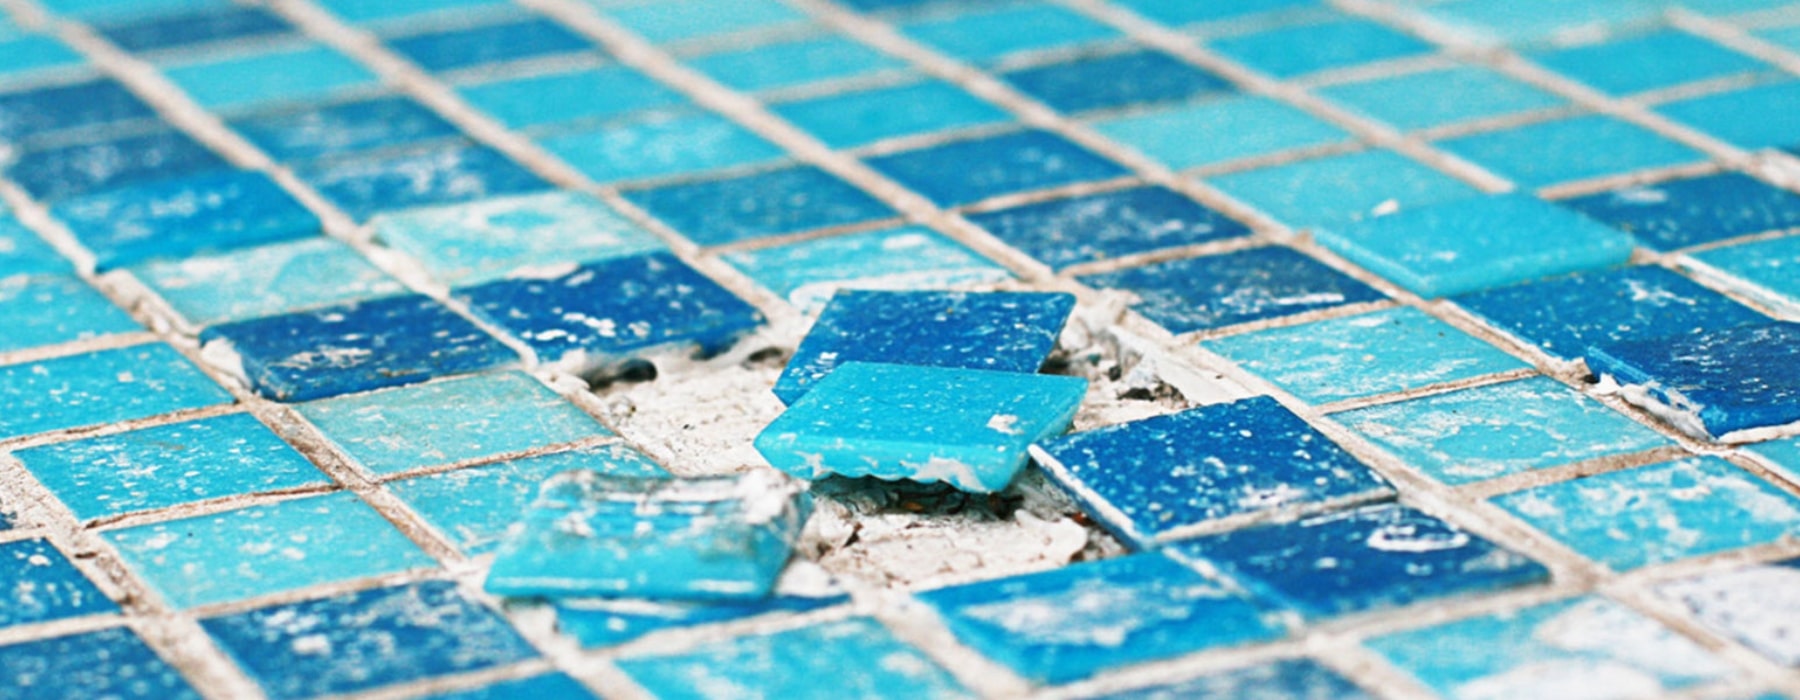 Restructuring a swimming pool